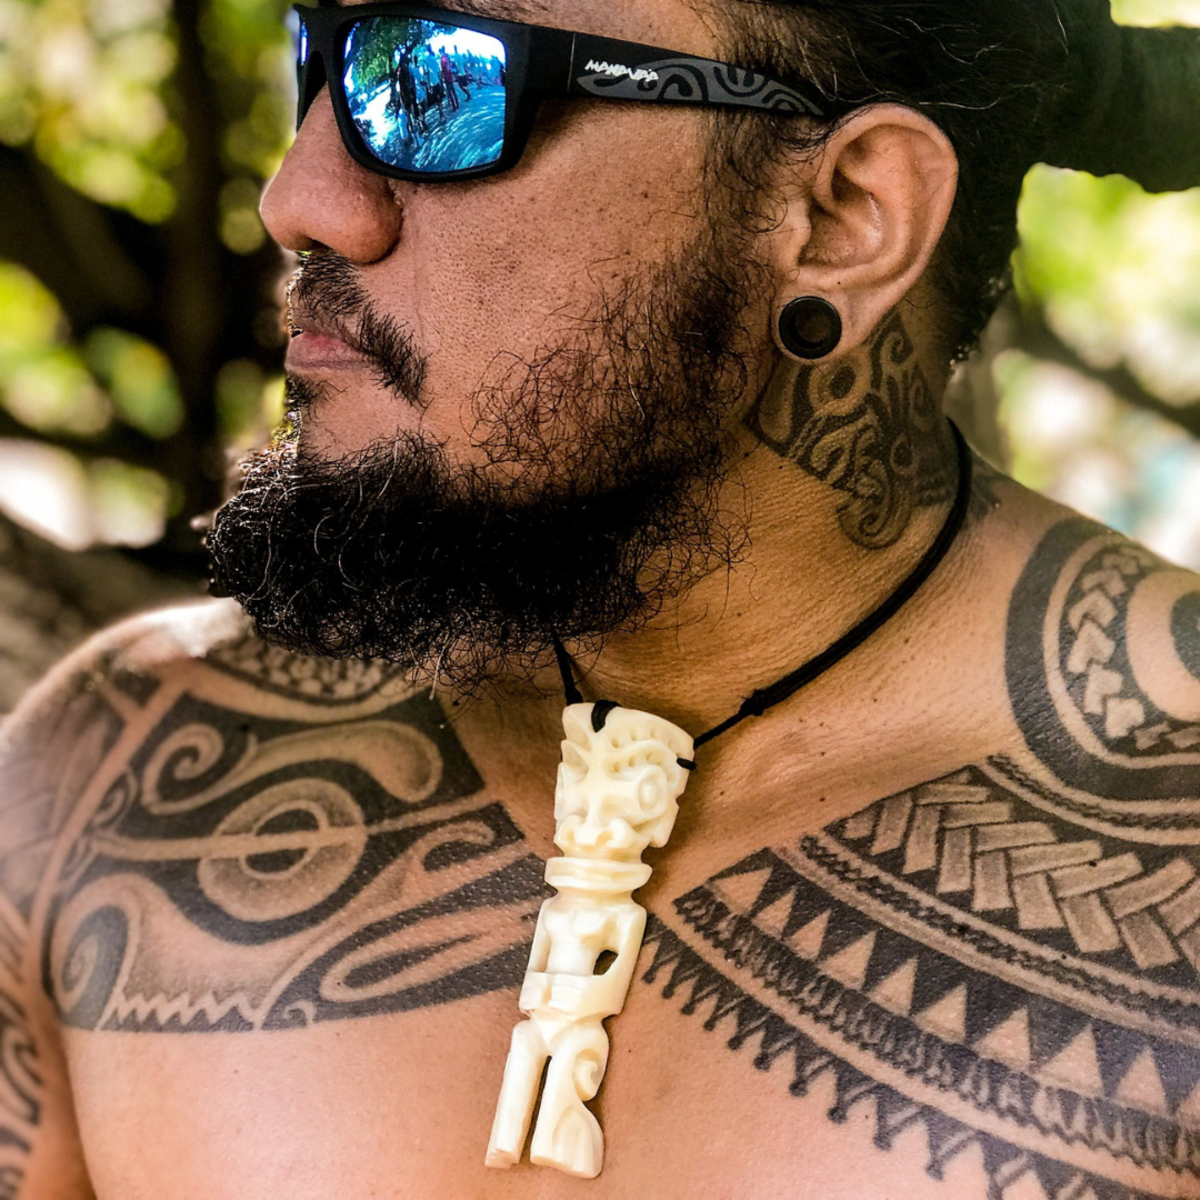 Learn 95+ about tribal neck tattoos best - in.daotaonec